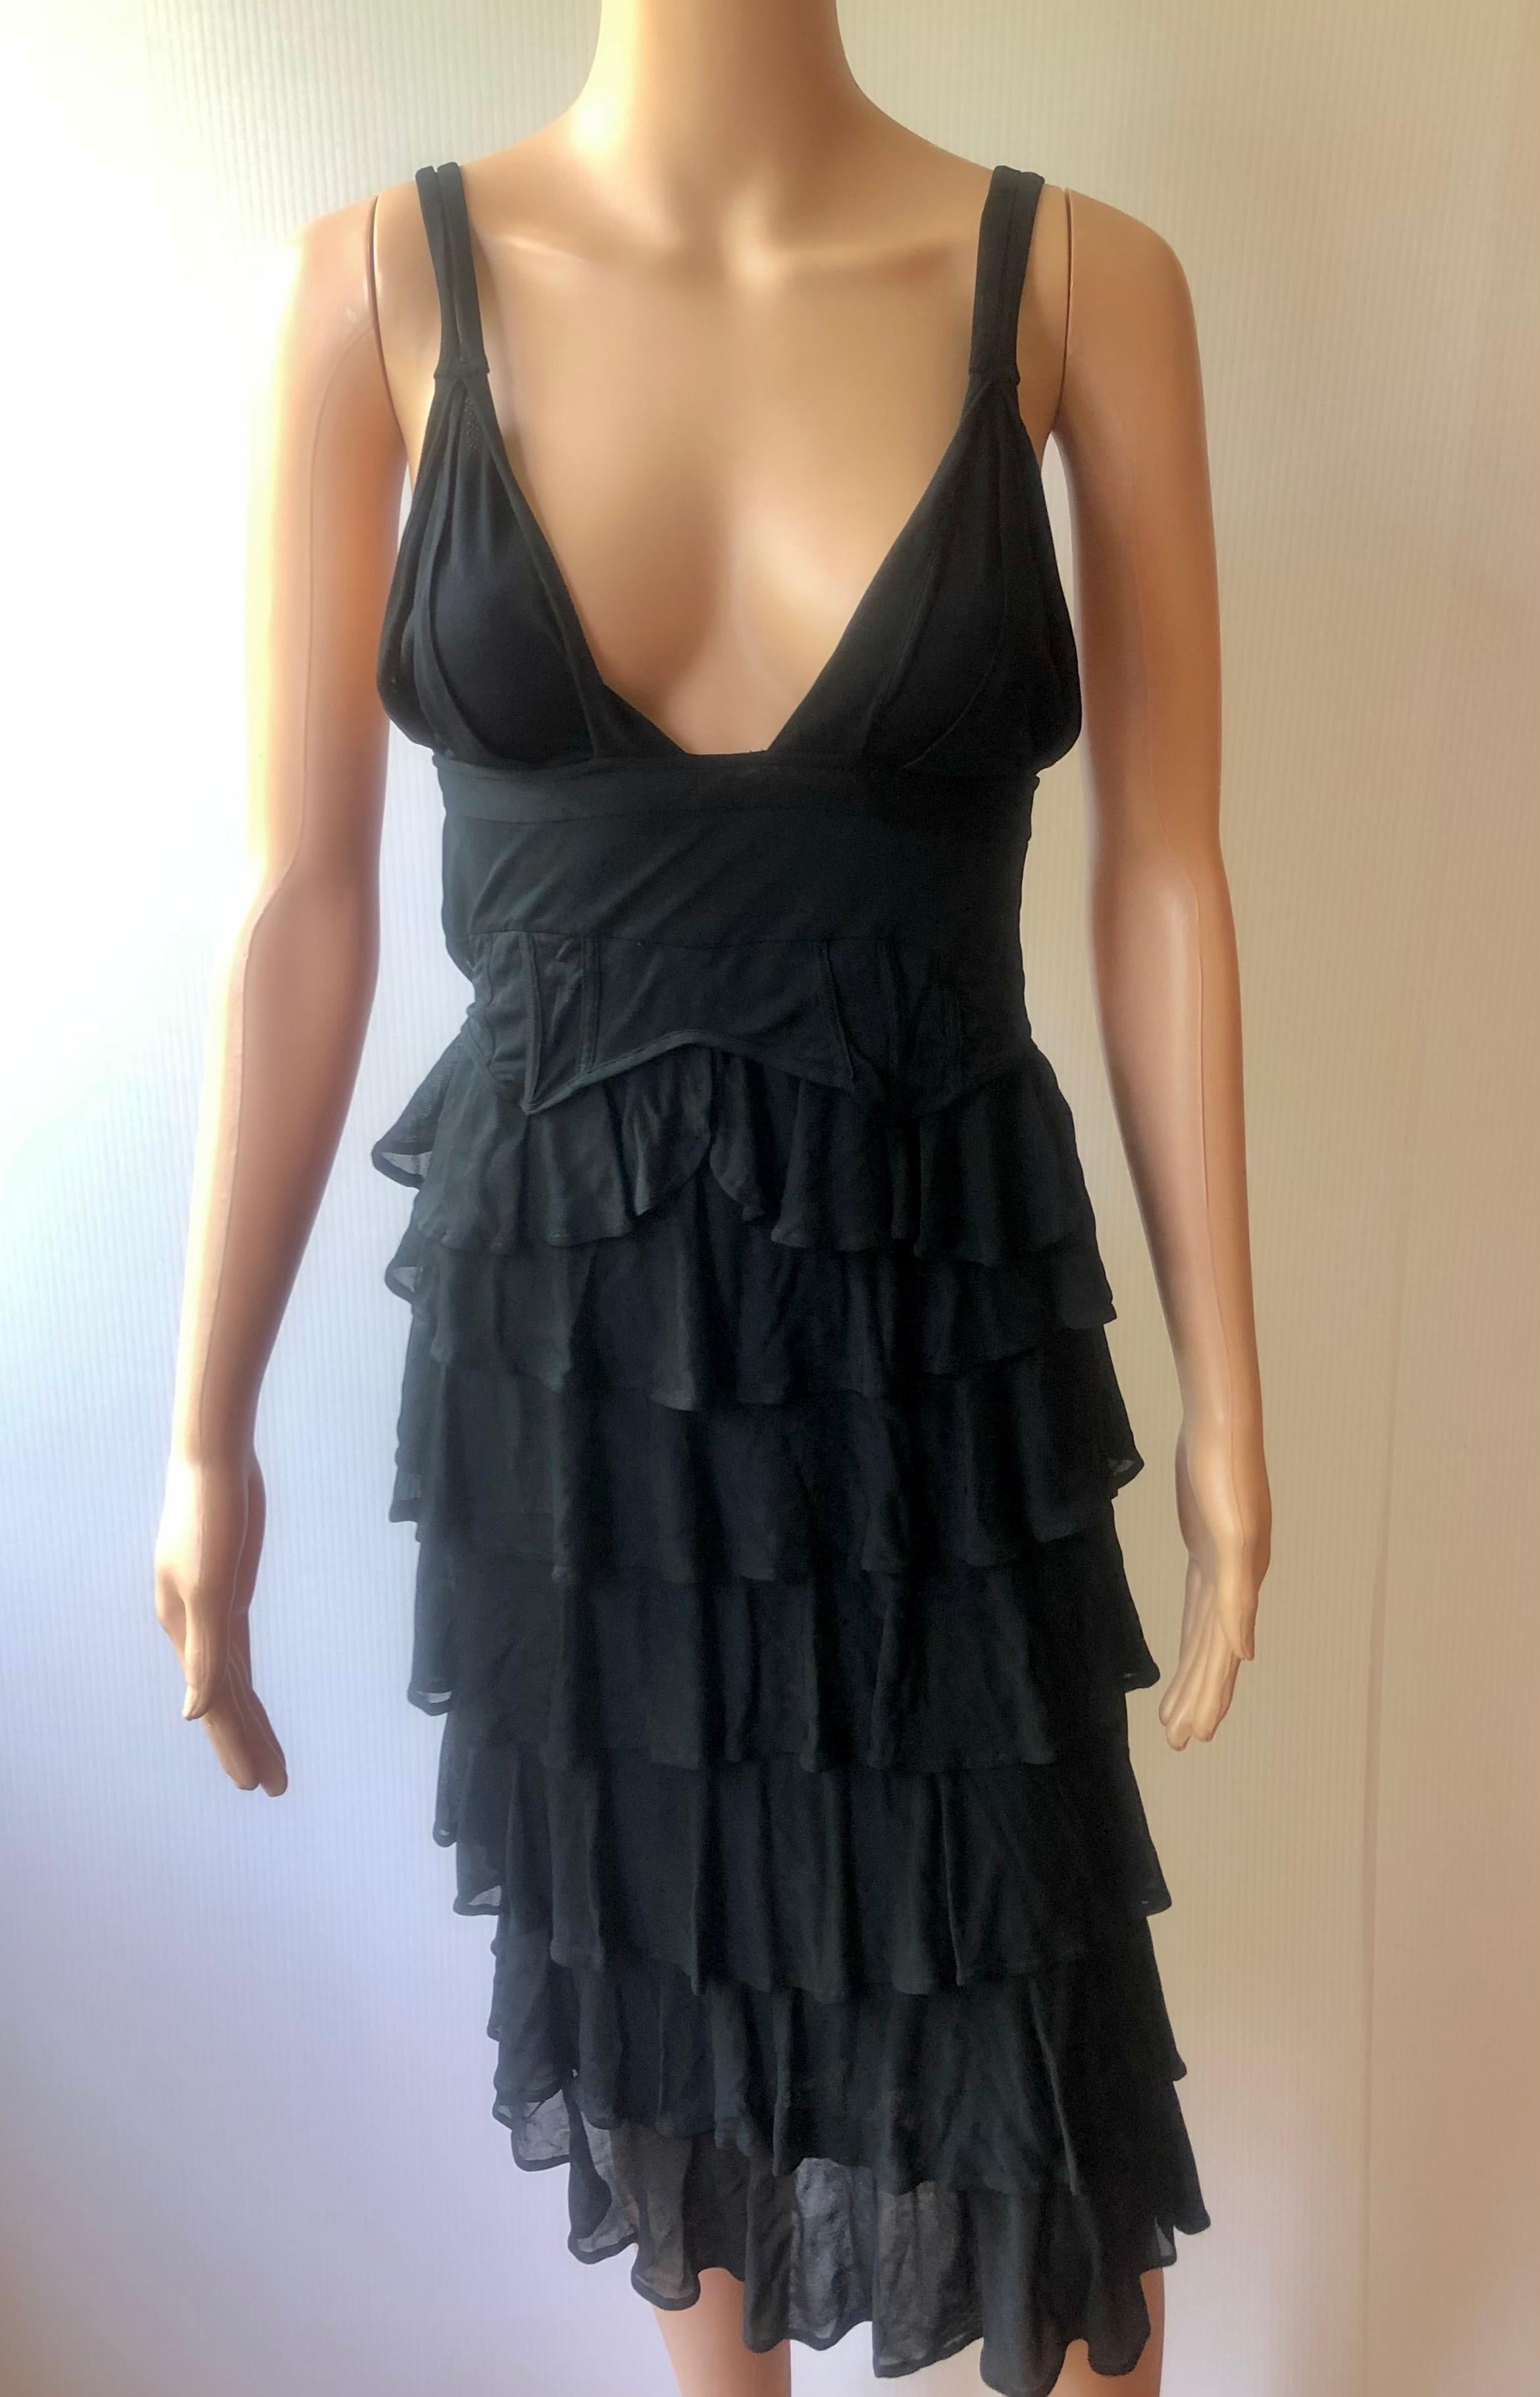 Yves Saint Laurent Tom Ford F/W 2003 Bra Cutout Semi-Sheer Black Ruffle Dress  In Good Condition For Sale In Naples, FL